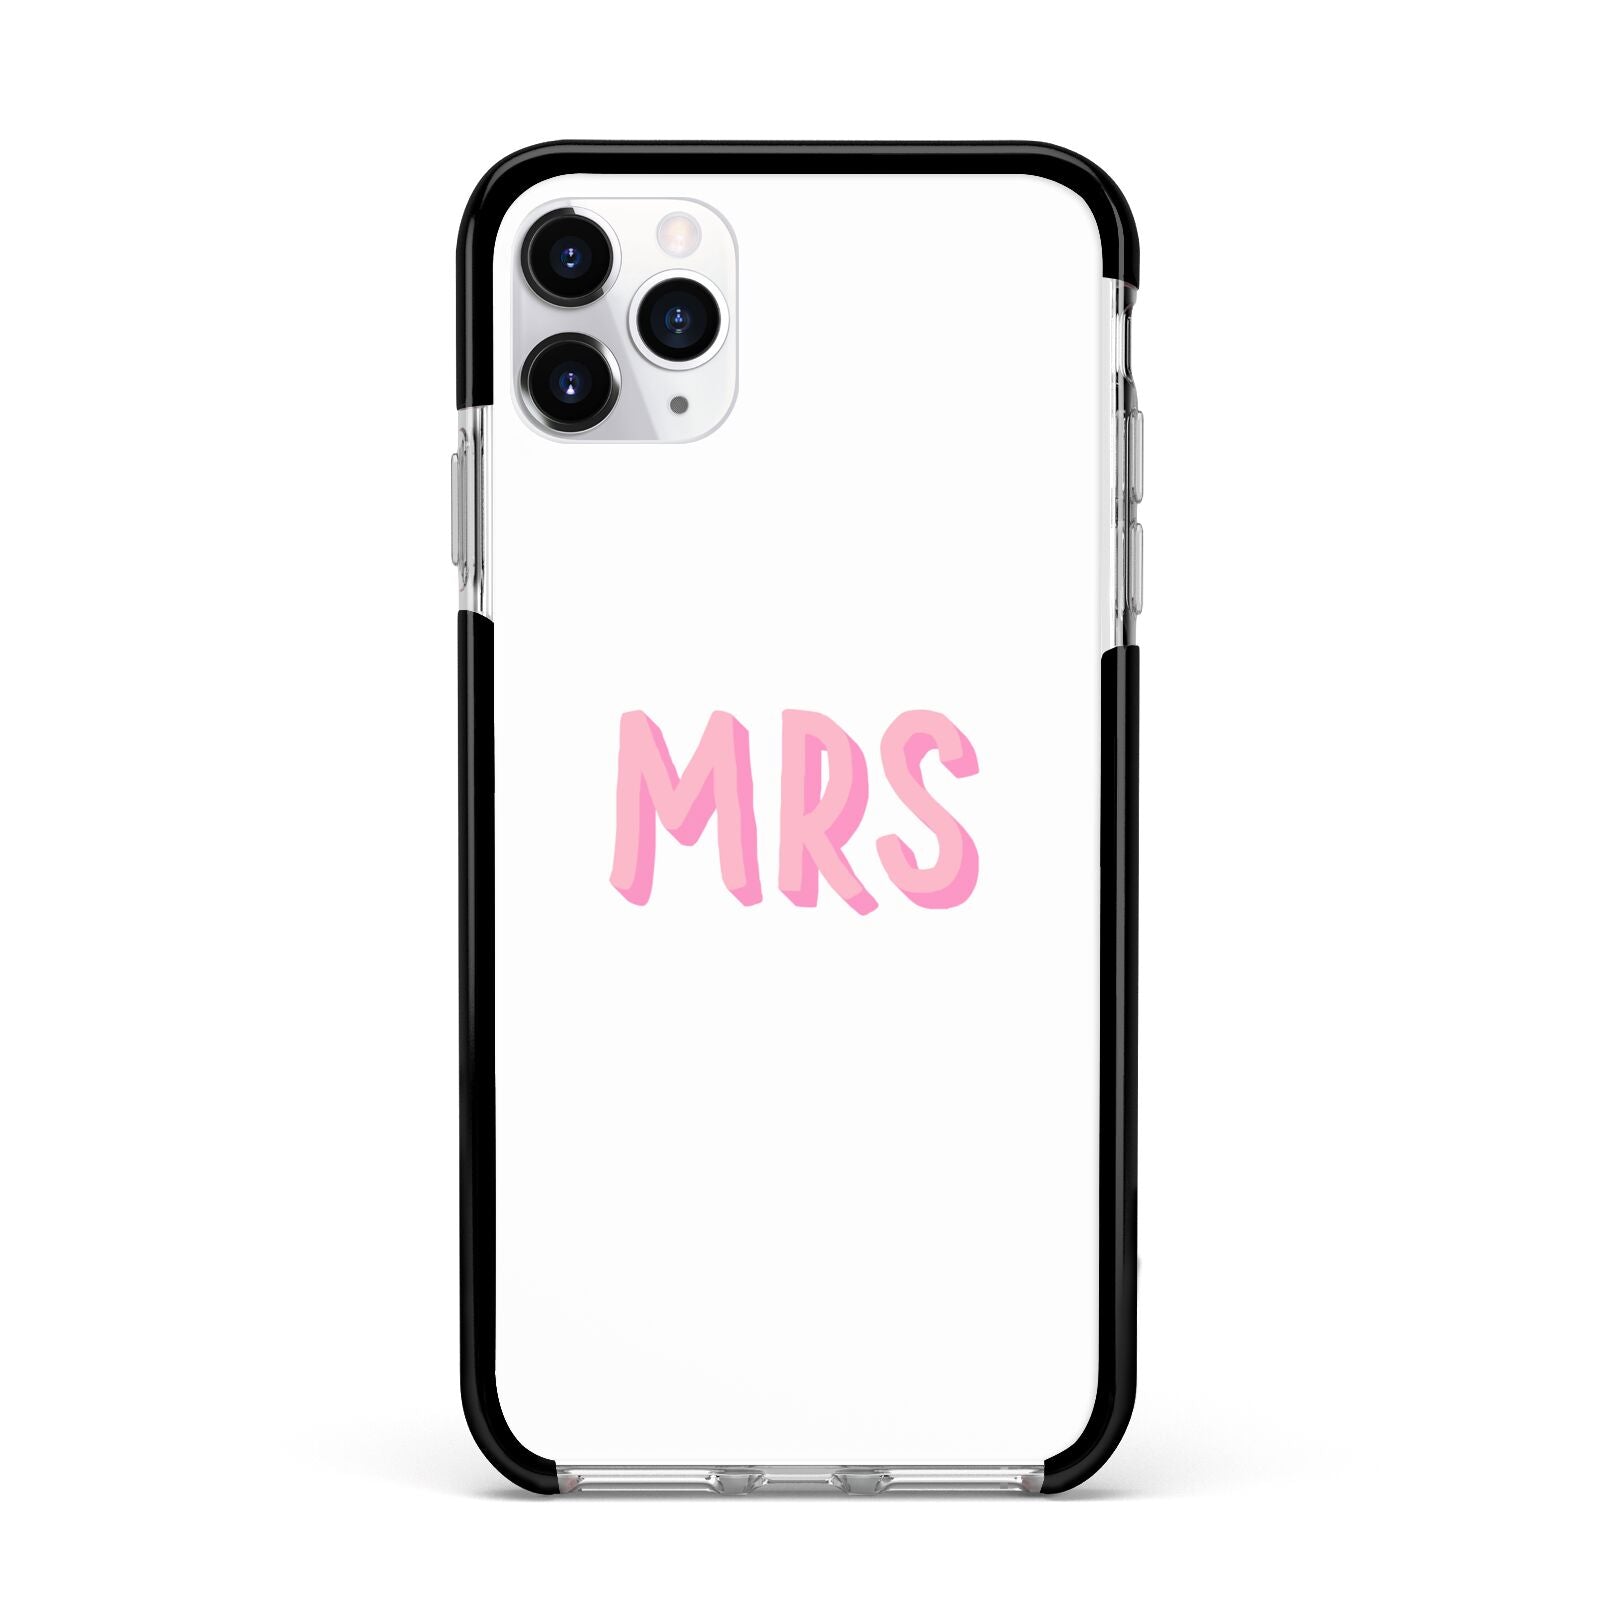 Mrs Apple iPhone 11 Pro Max in Silver with Black Impact Case